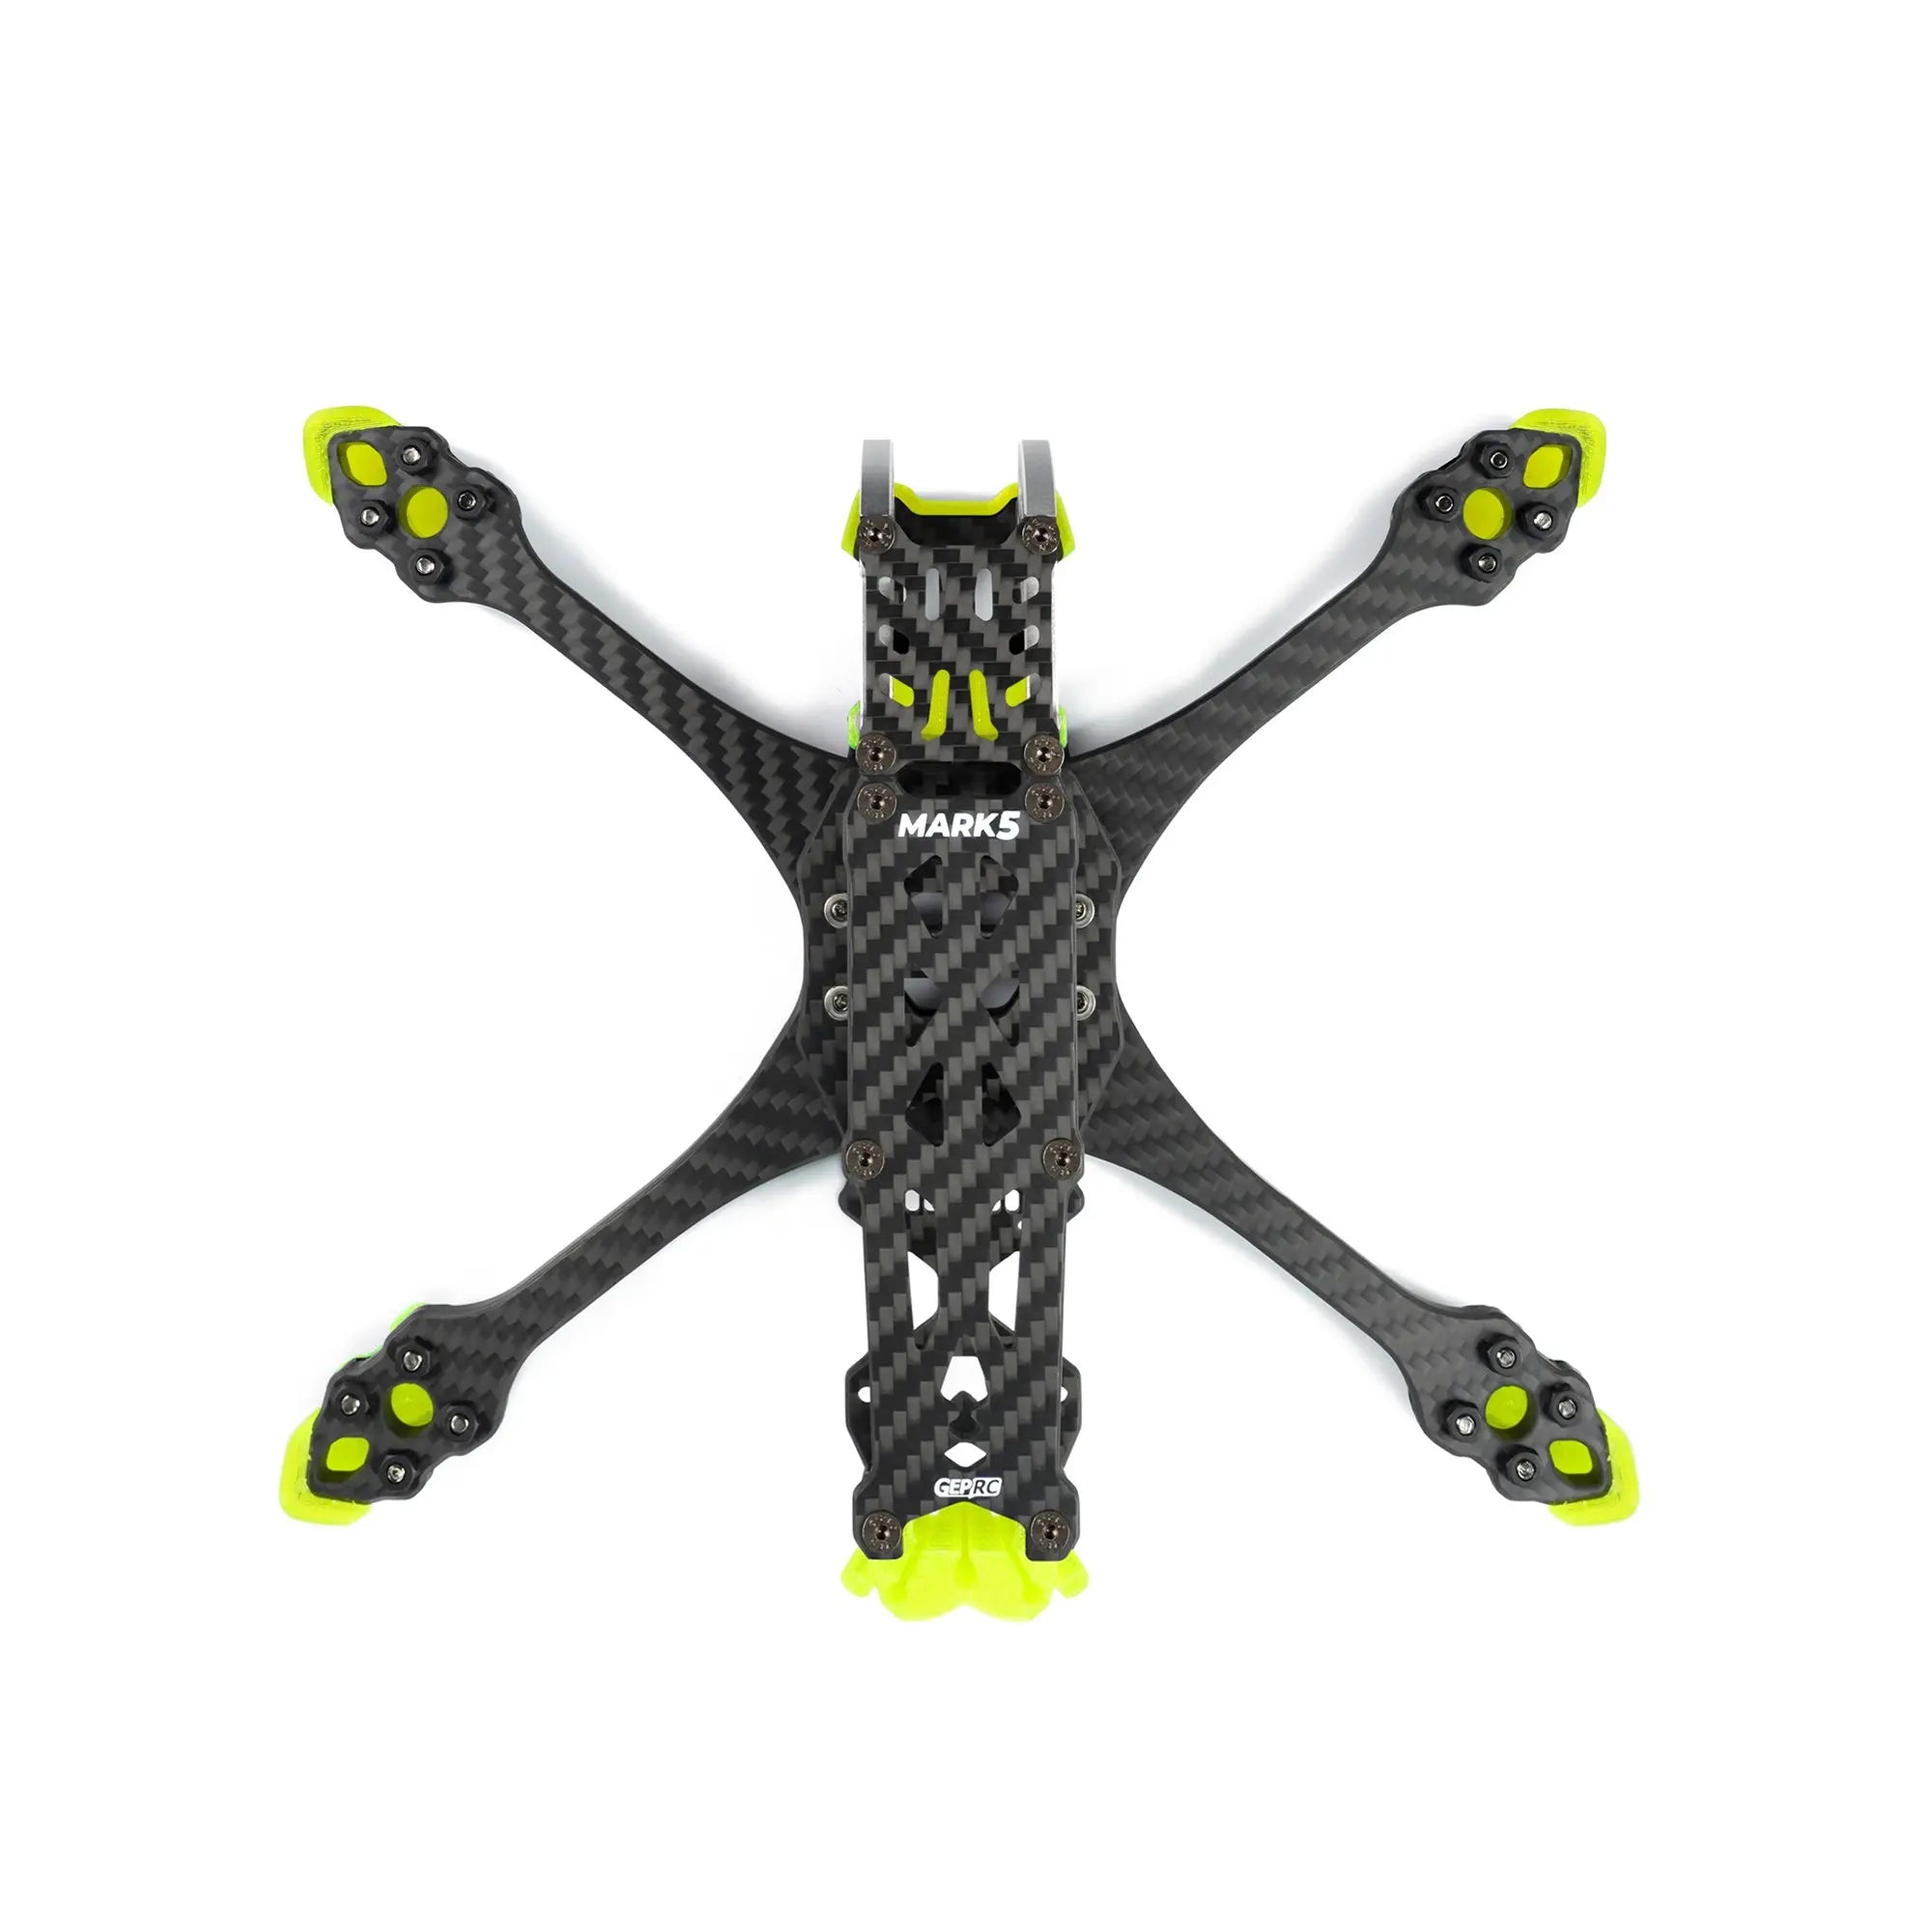 GEPRC GEP-MK5 Frame, VTX is compatible with D JI Air Unit and VISTA .